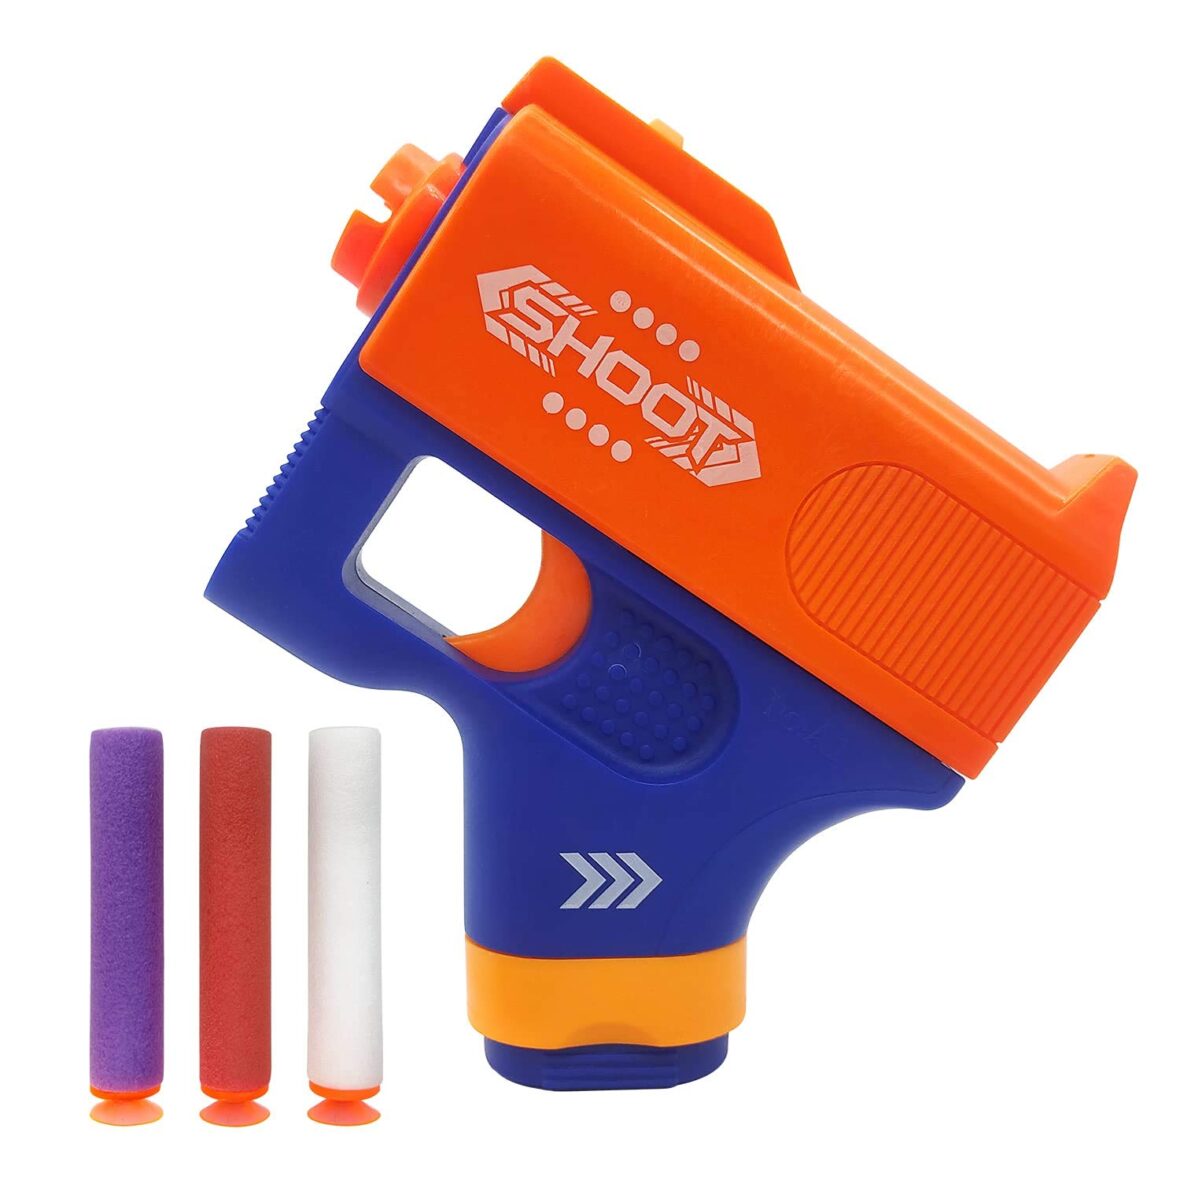 Twin Shot Manual Soft Bullet Gun with 6 Foam Bullets, Set of Two Compact & Light Toy Multicolor Guns for 8+ Kids, Durable and Safe Design, Easy to Operate for Shooting Imaginary Targets